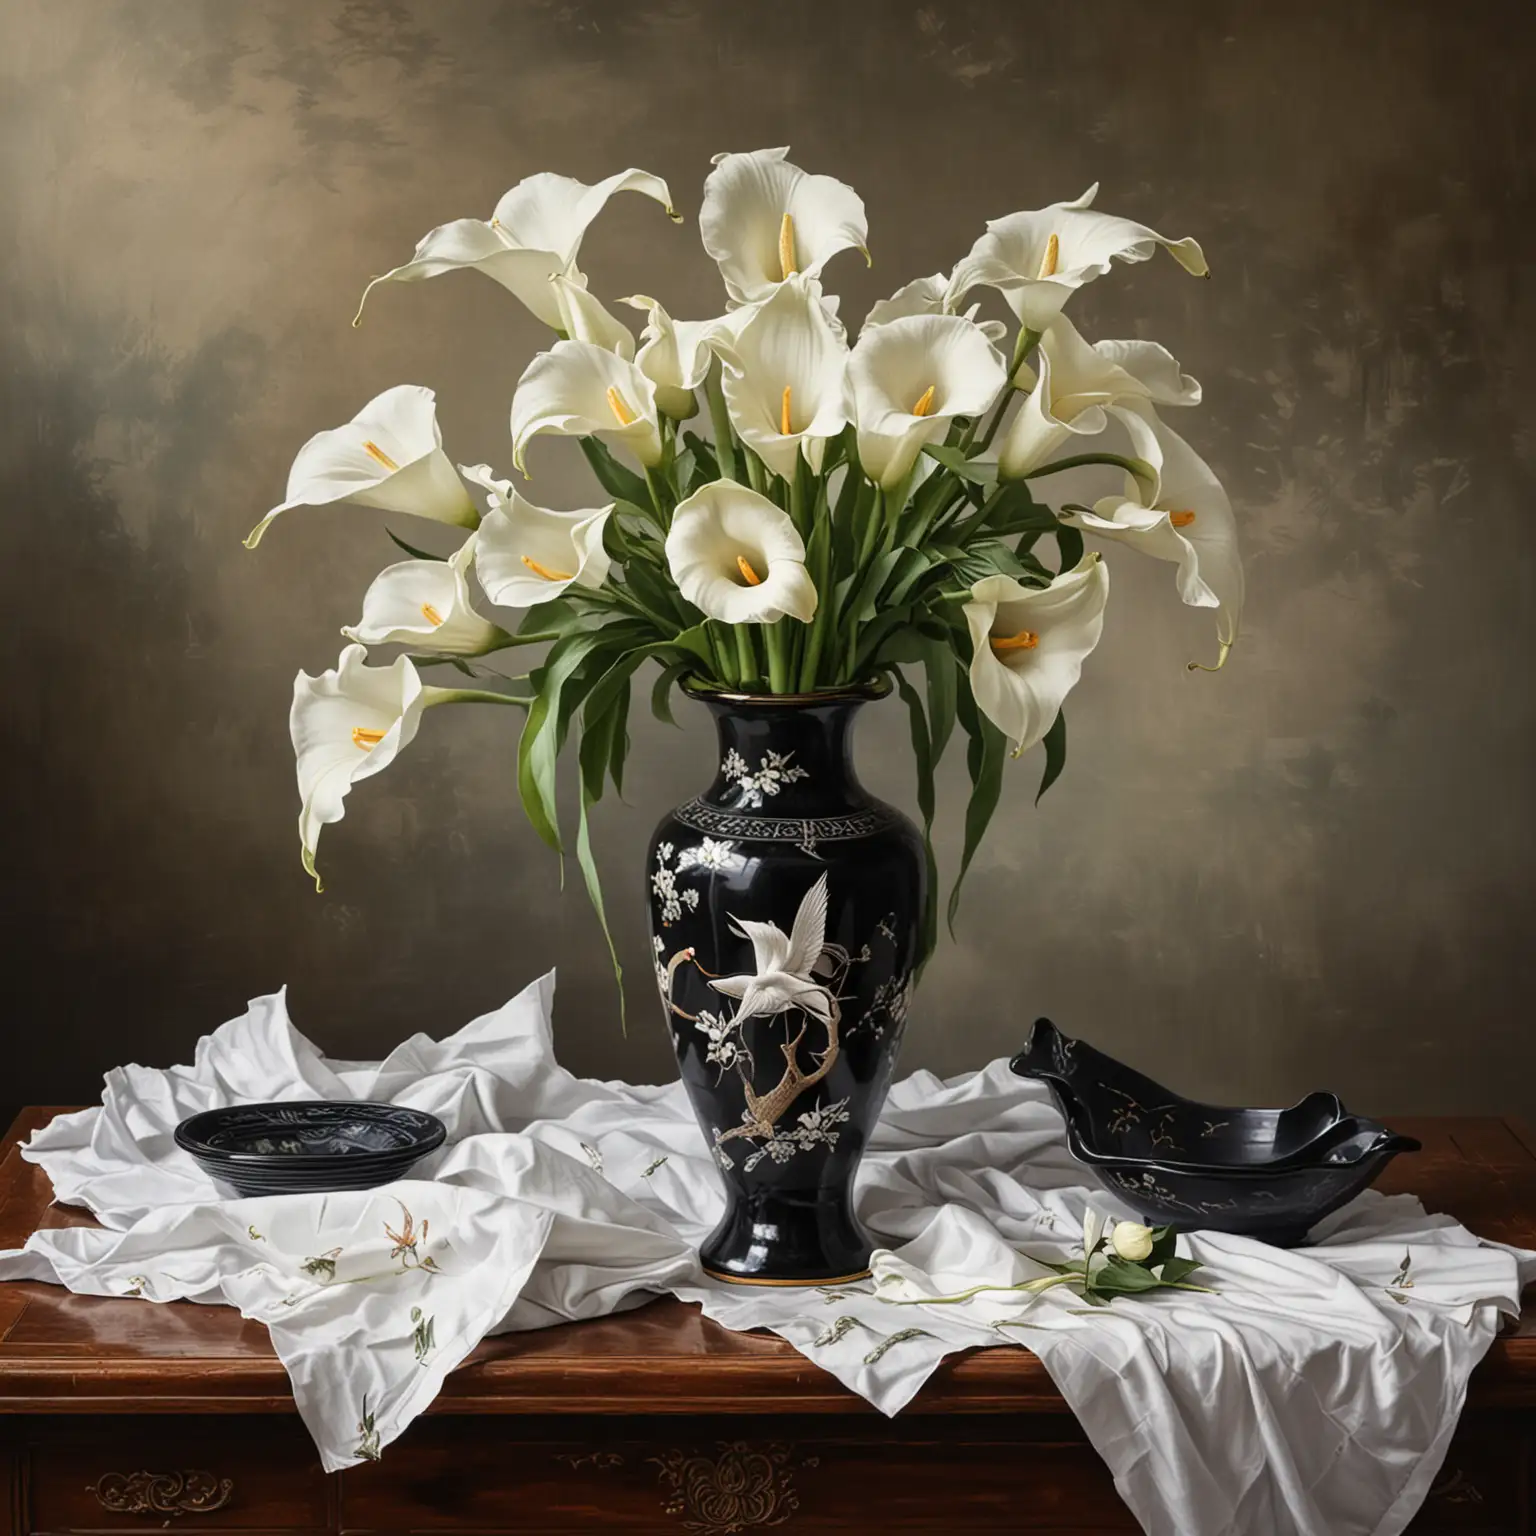 Exquisite Still Life Painting Oriental Vase and White Calla Lilies on Table